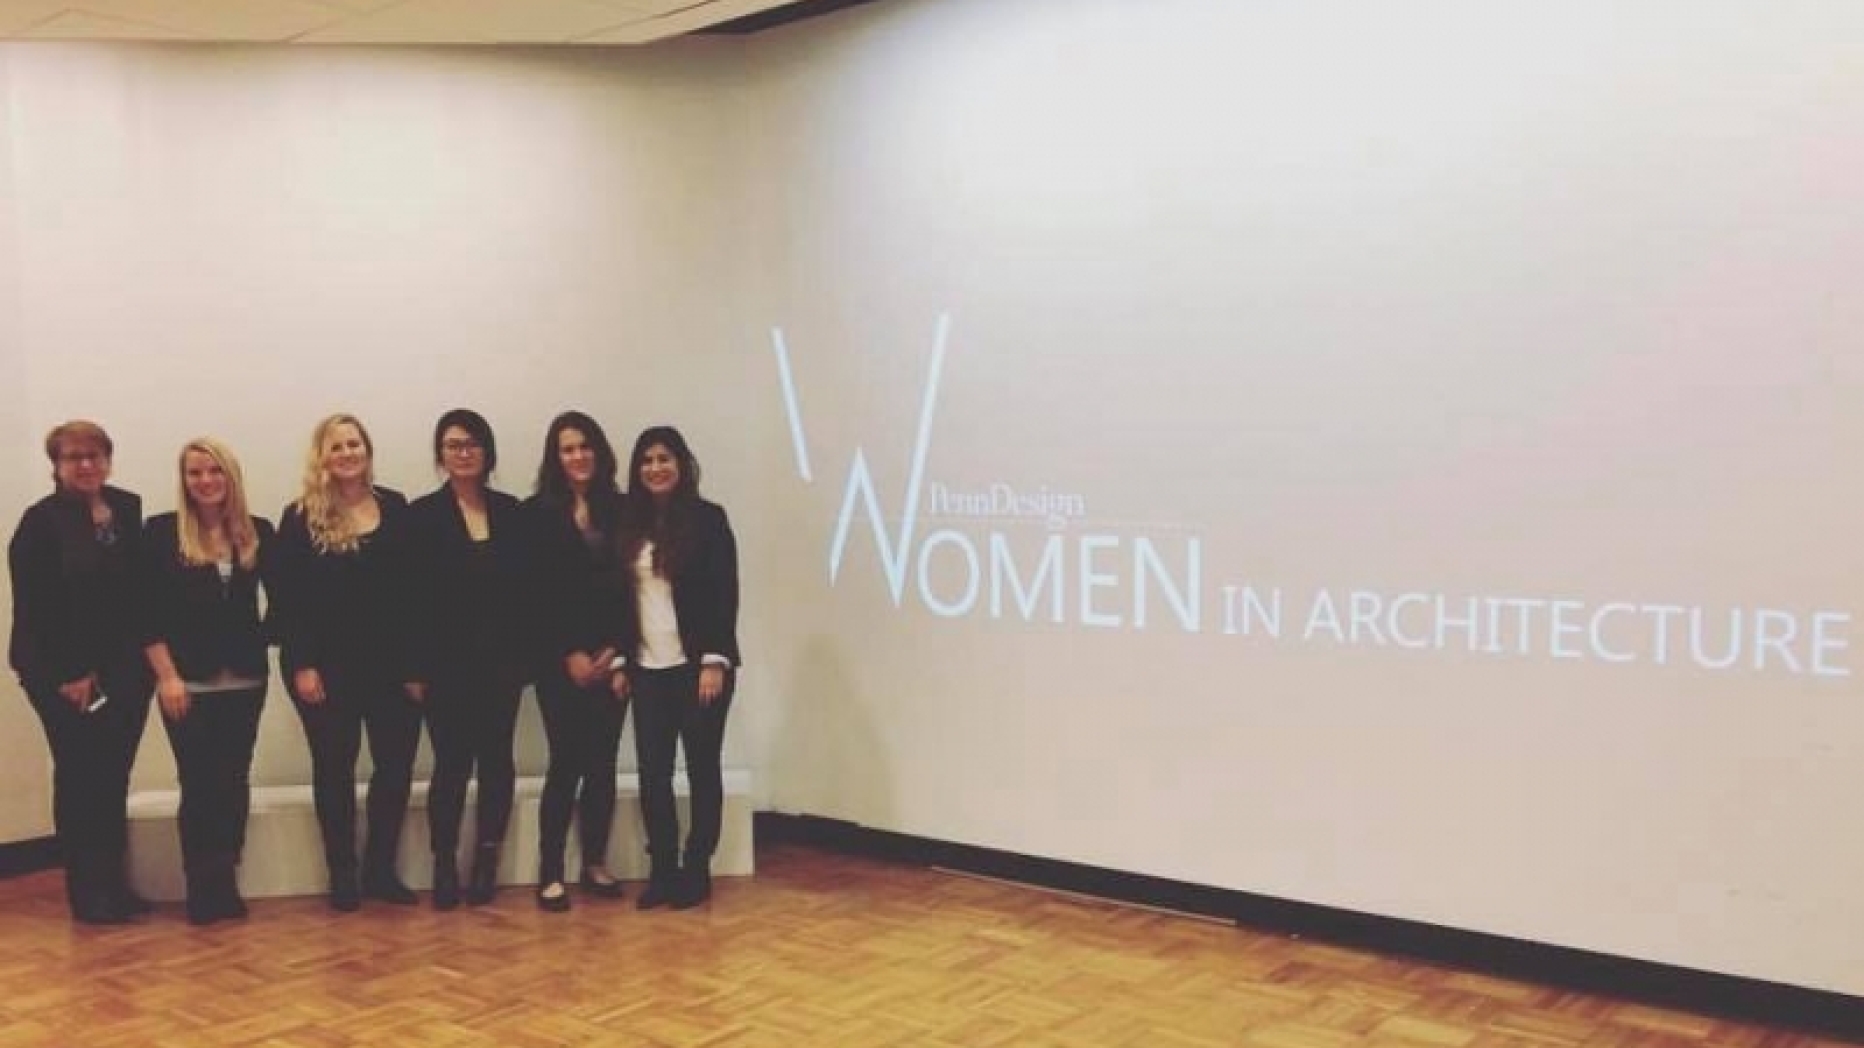 Group of women standing next to a projection saying "Women in architecture"